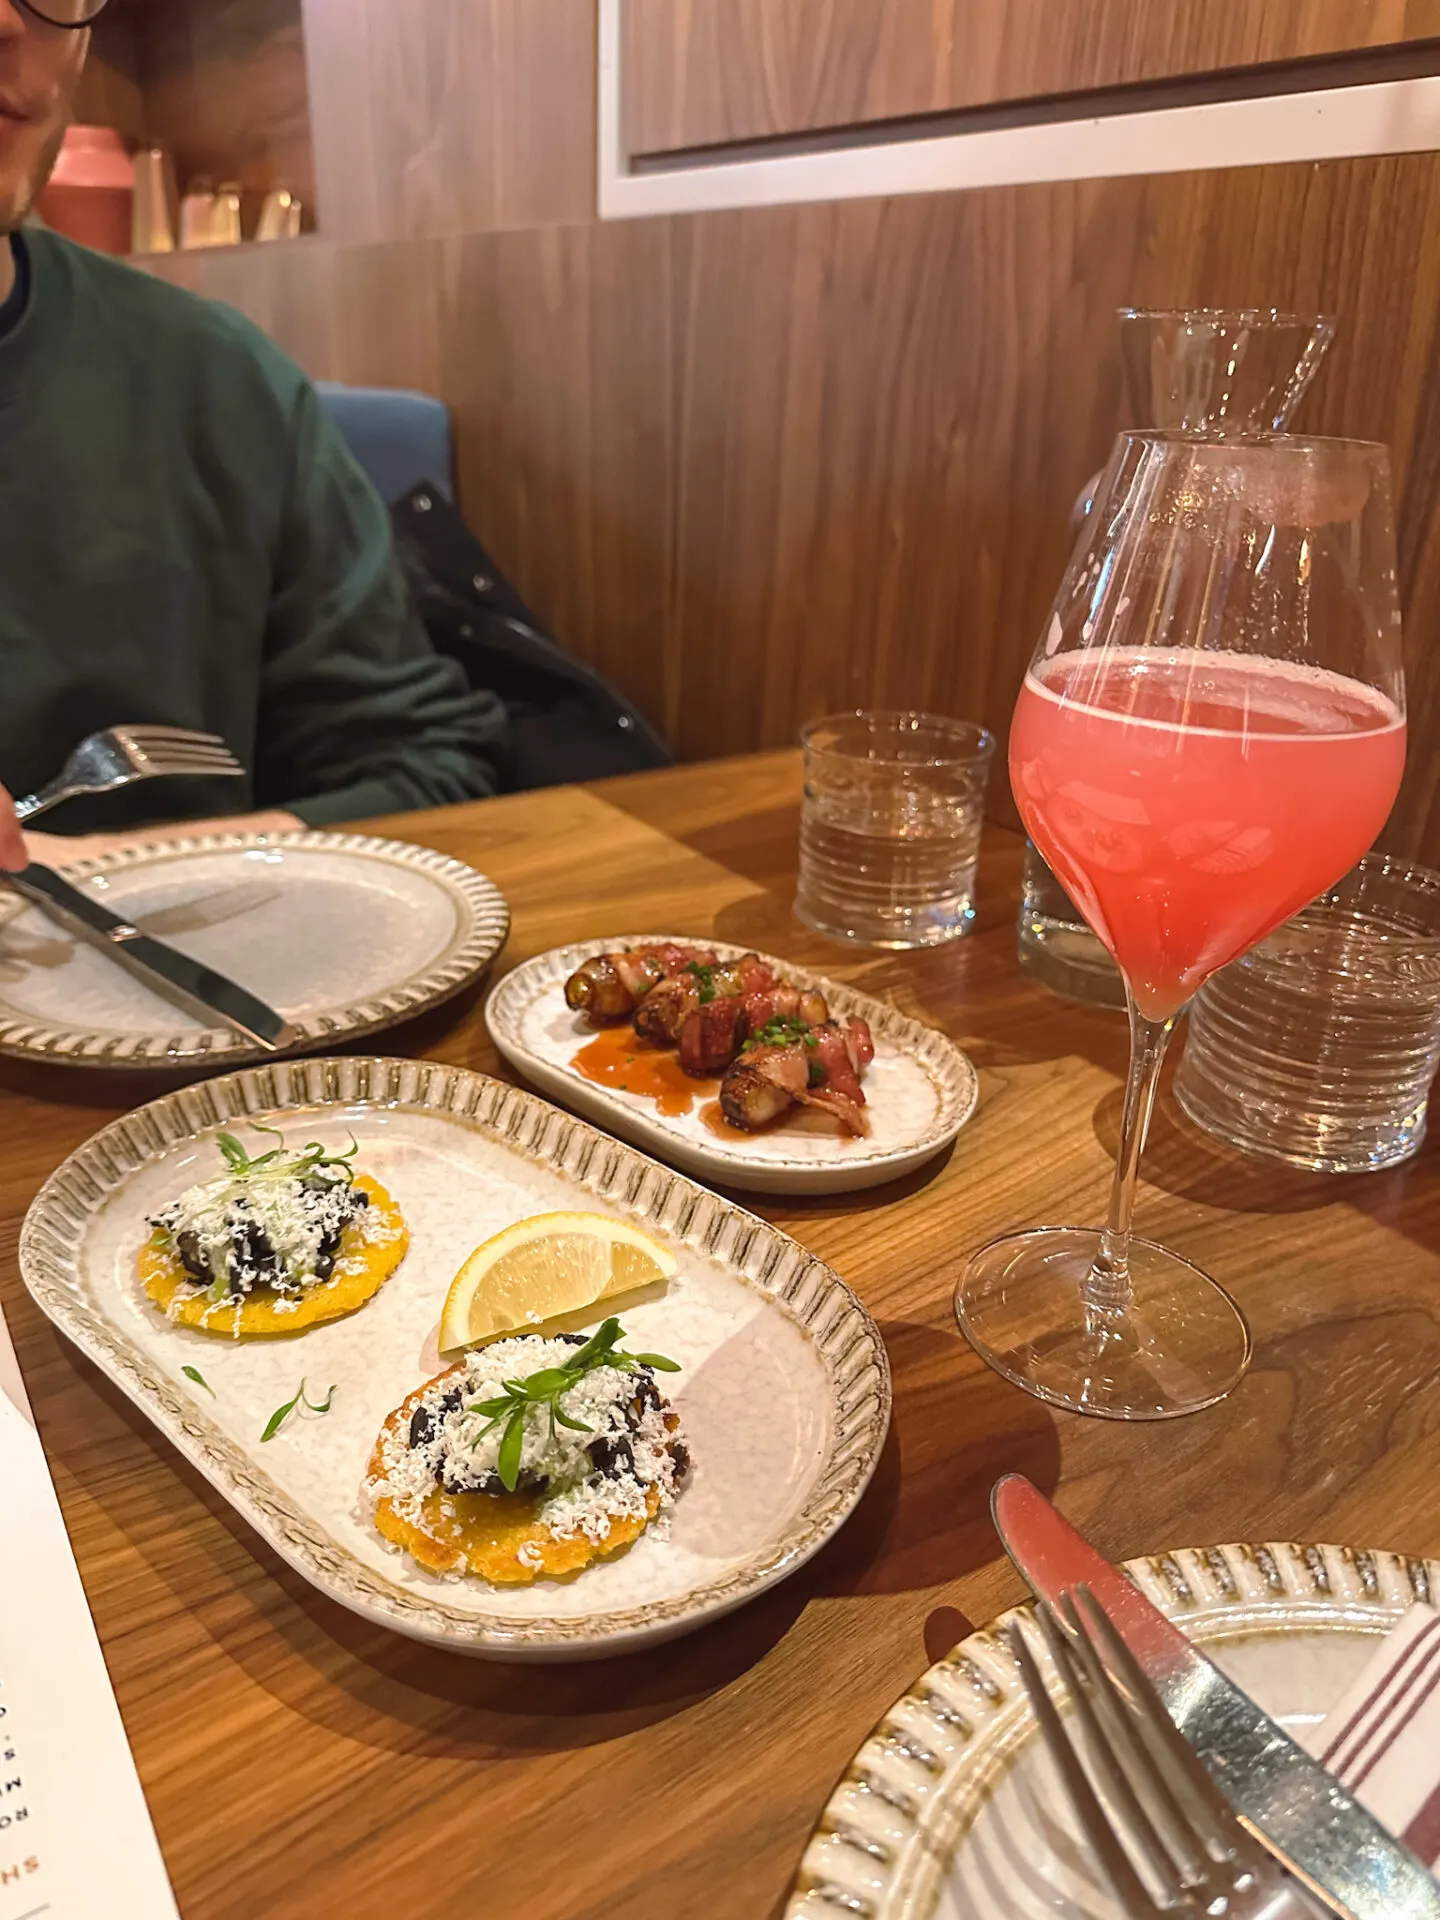 All-you-can-eat South American brunch at MARKED Restaurant in Toronto